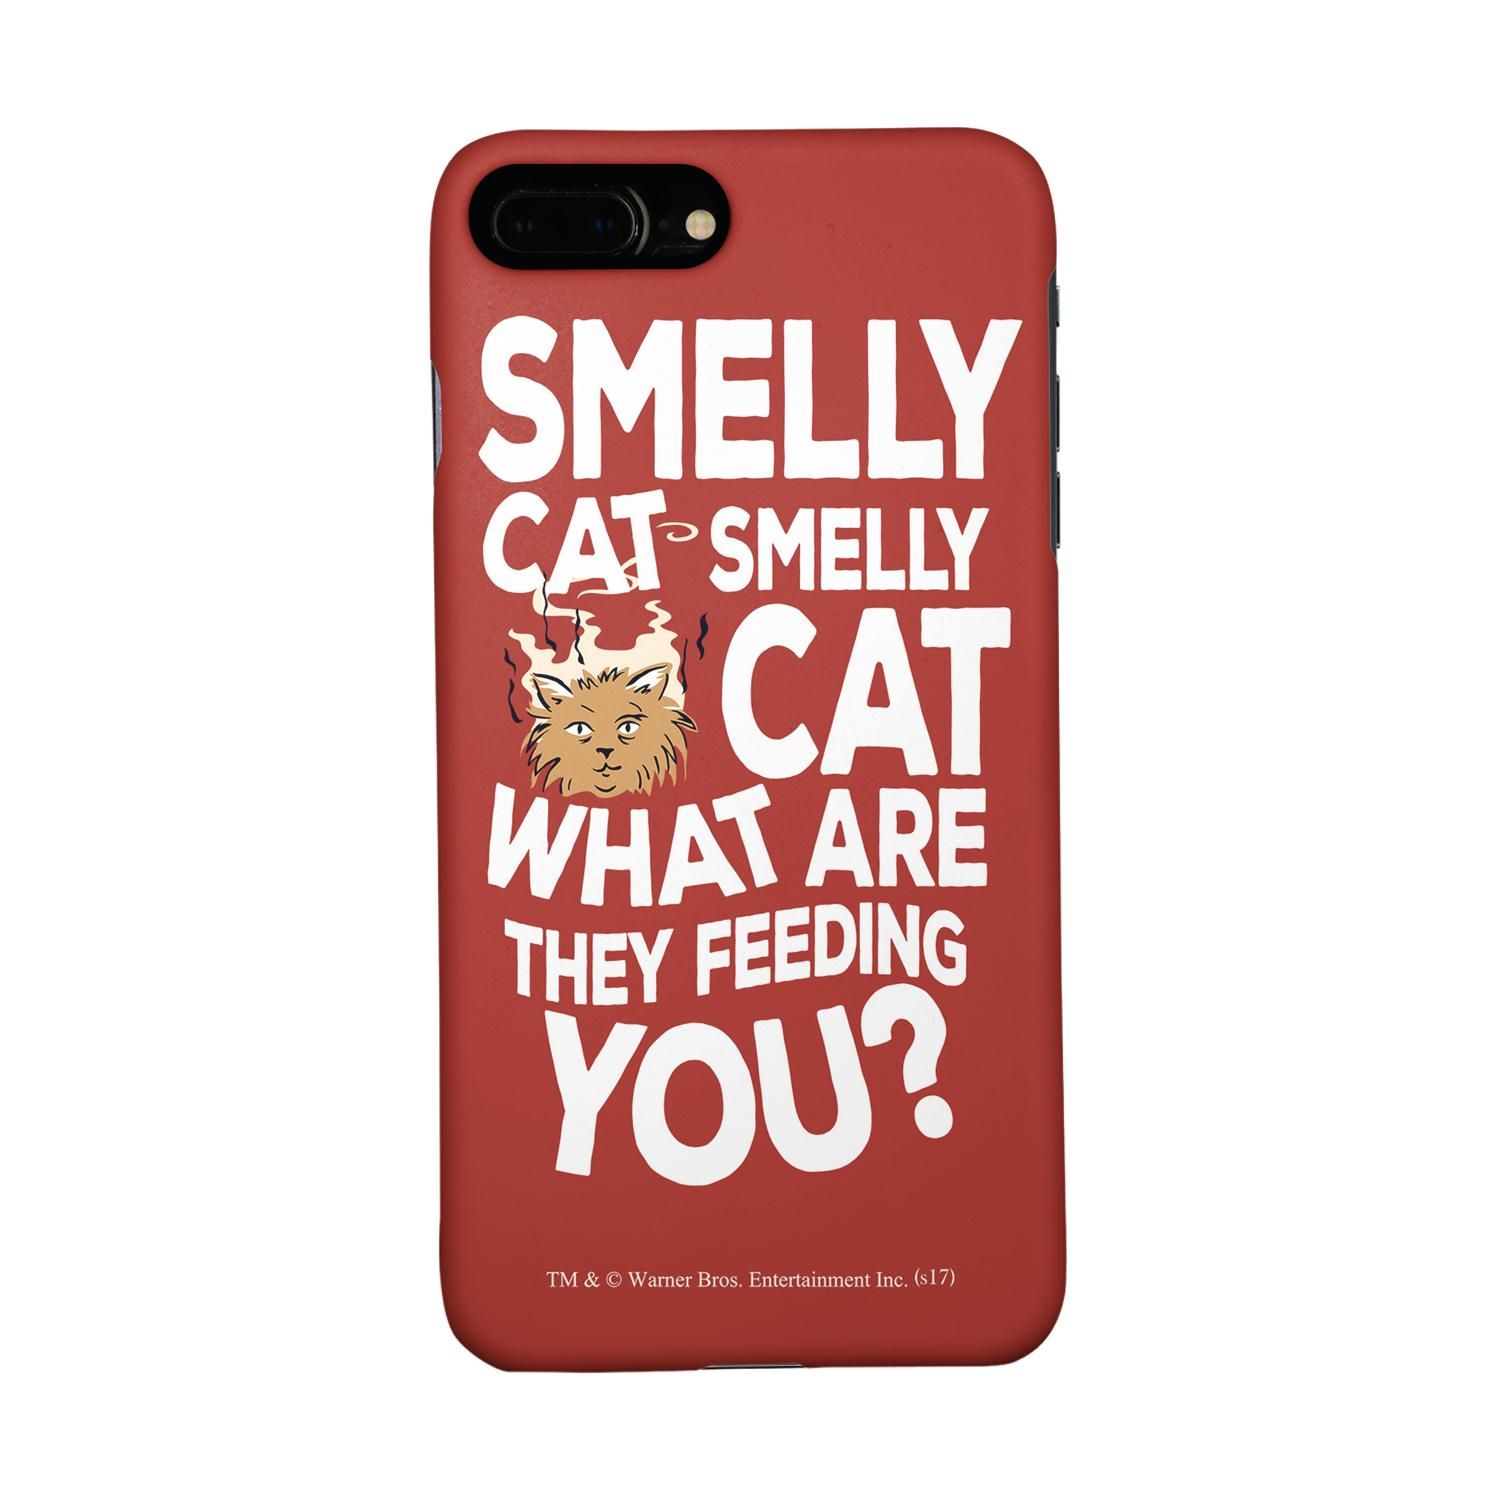 Buy Friends Smelly Cat - Sleek Phone Case for iPhone 7 Plus Online